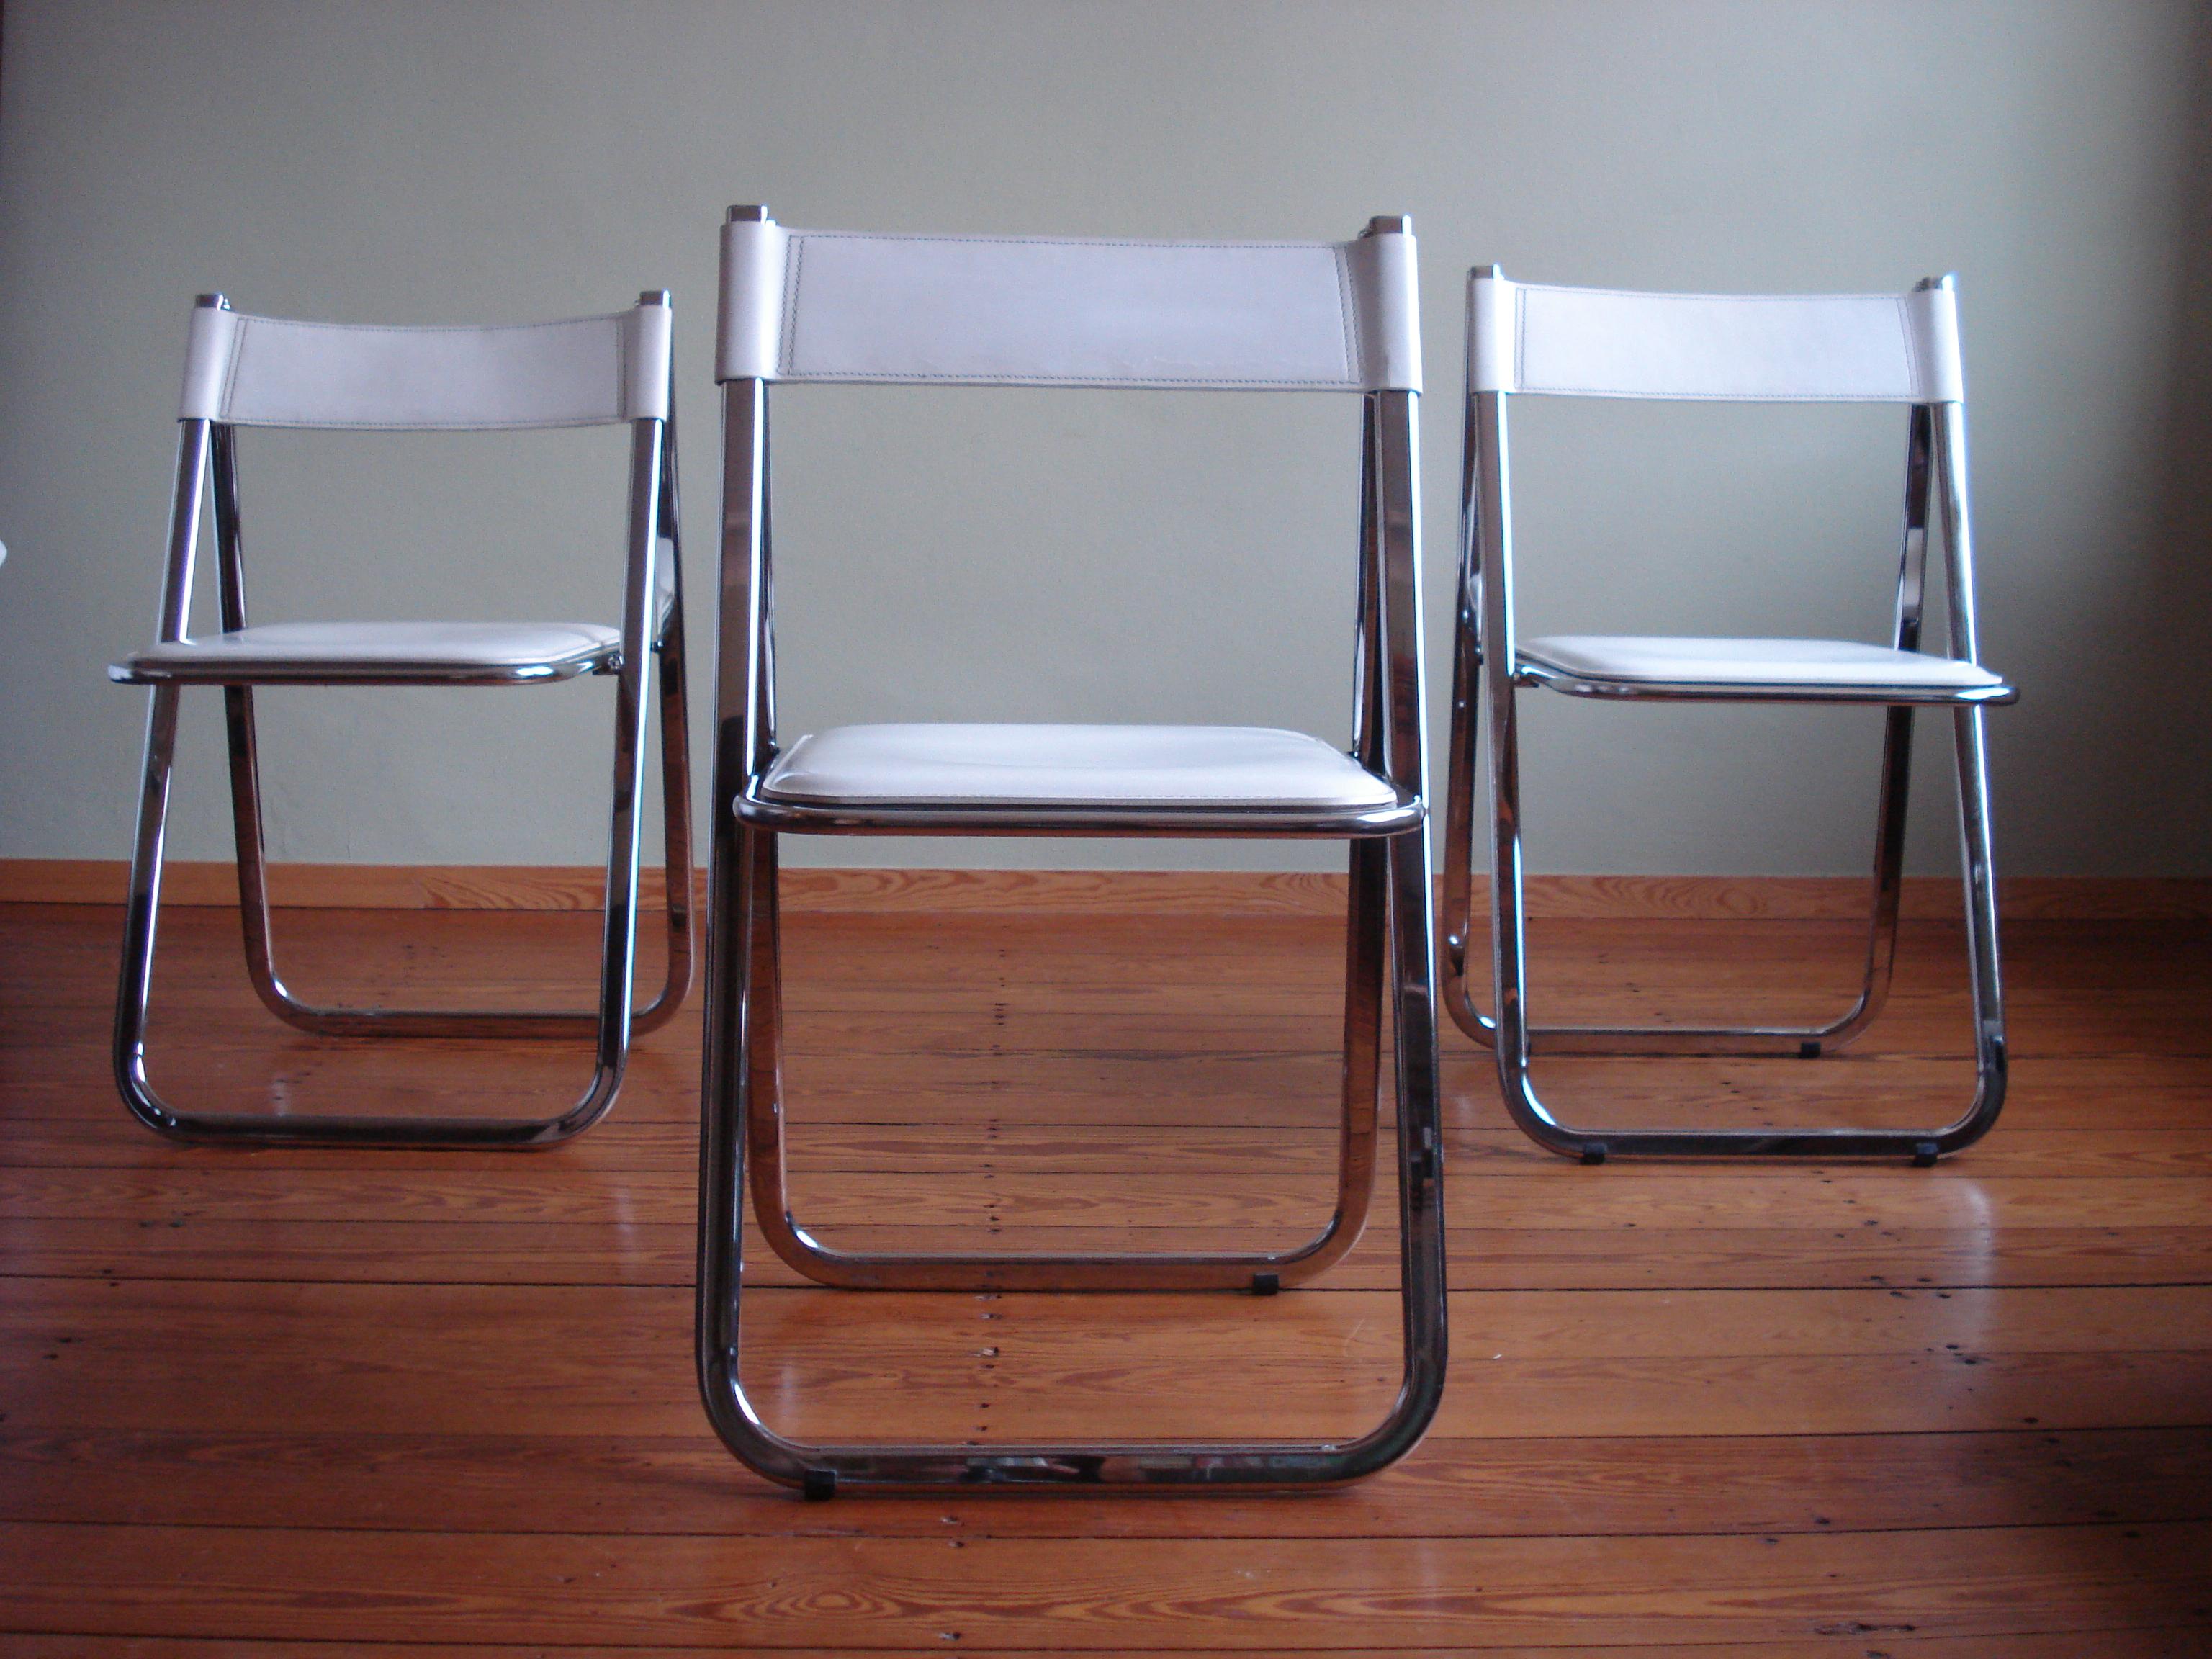 Rare set of three beautiful folding chairs by Arrben, made in the 1970s.
This set of four Tamara chairs was manufactured by the Italian Arrben factory during the 1970s. The frame is made of a chrome-plated metal. The seat and backrest are